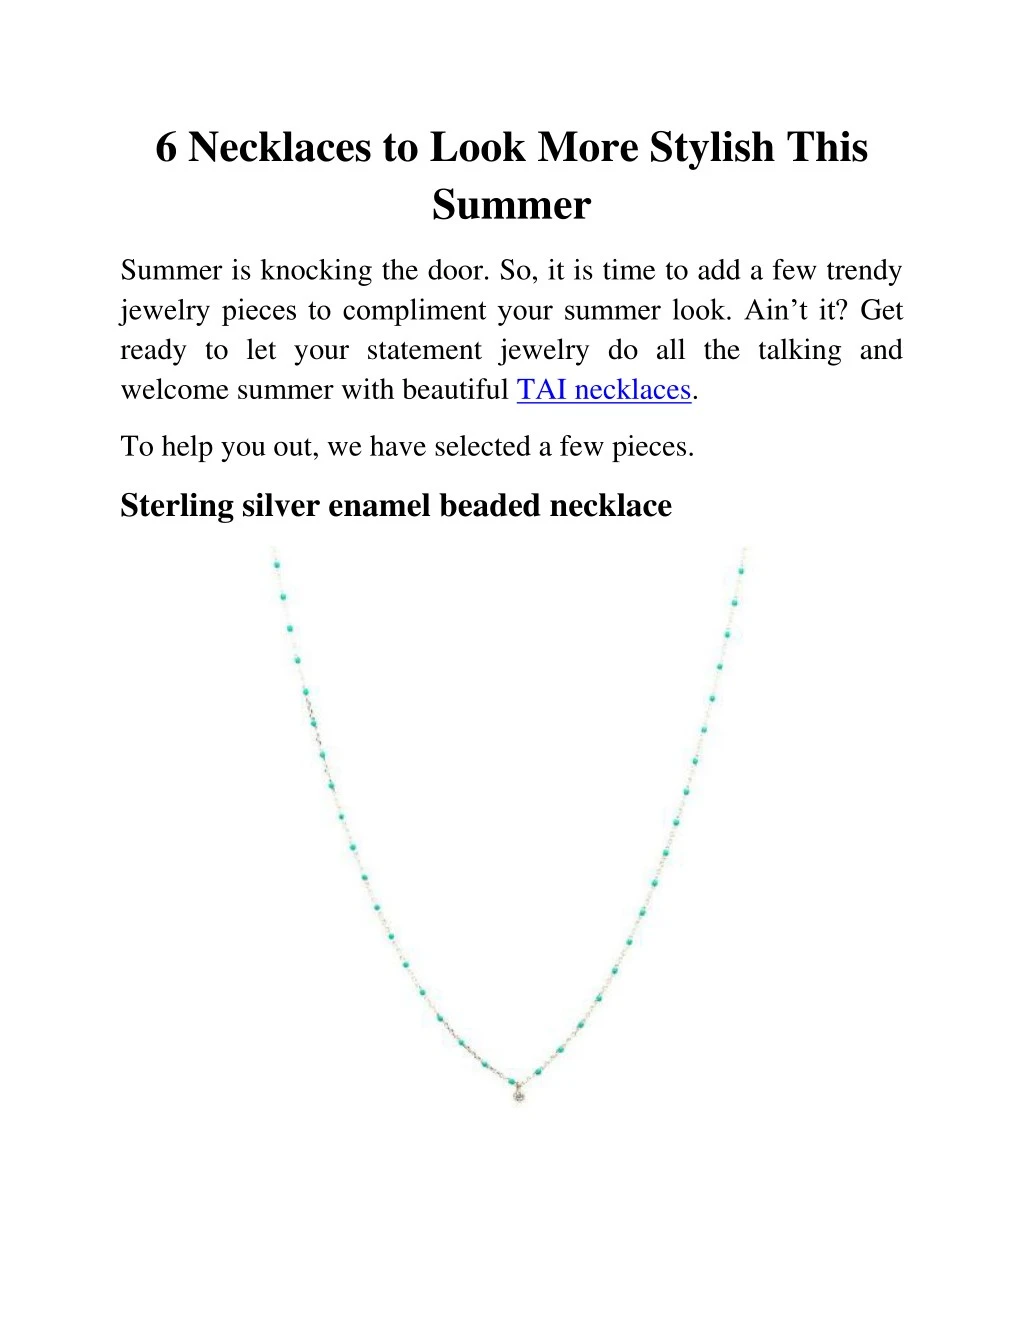 6 necklaces to look more stylish this summer n.